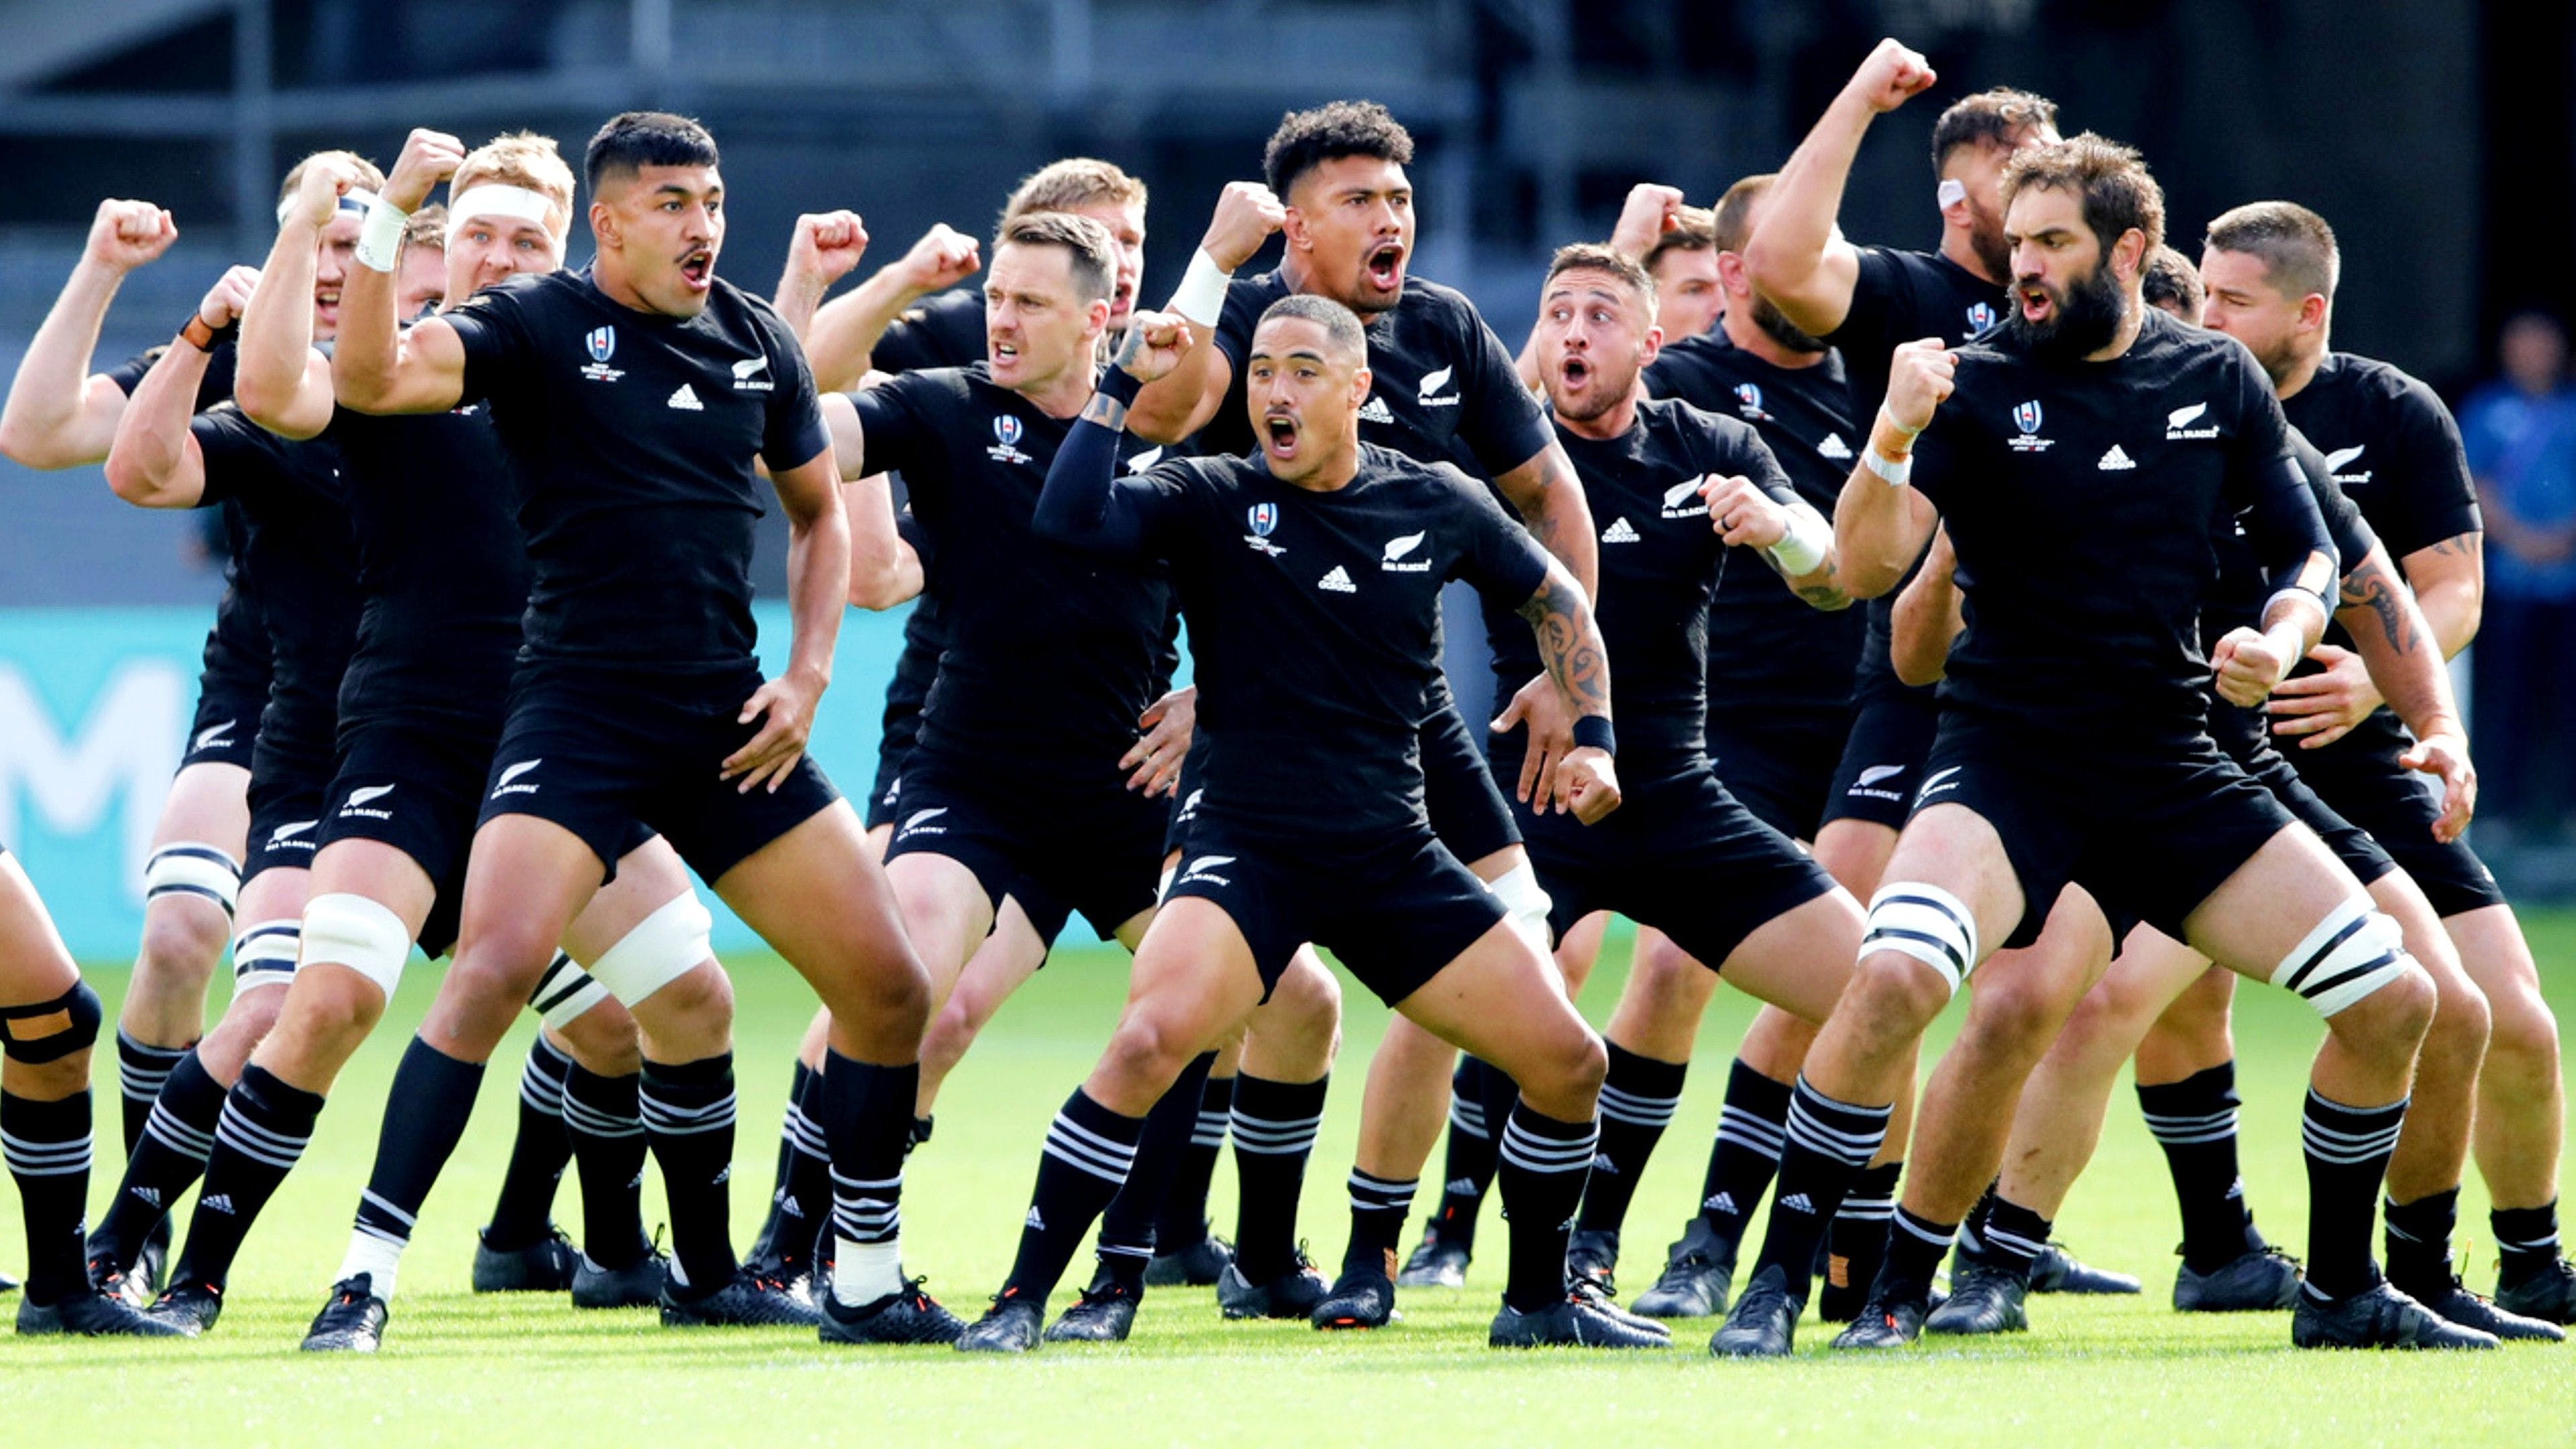 Haka: The All Blacks, Performing the haka, Rugby World Cup Pool B, Tokyo Stadium, New Zealand and Namibia. 3840x2160 4K Background.